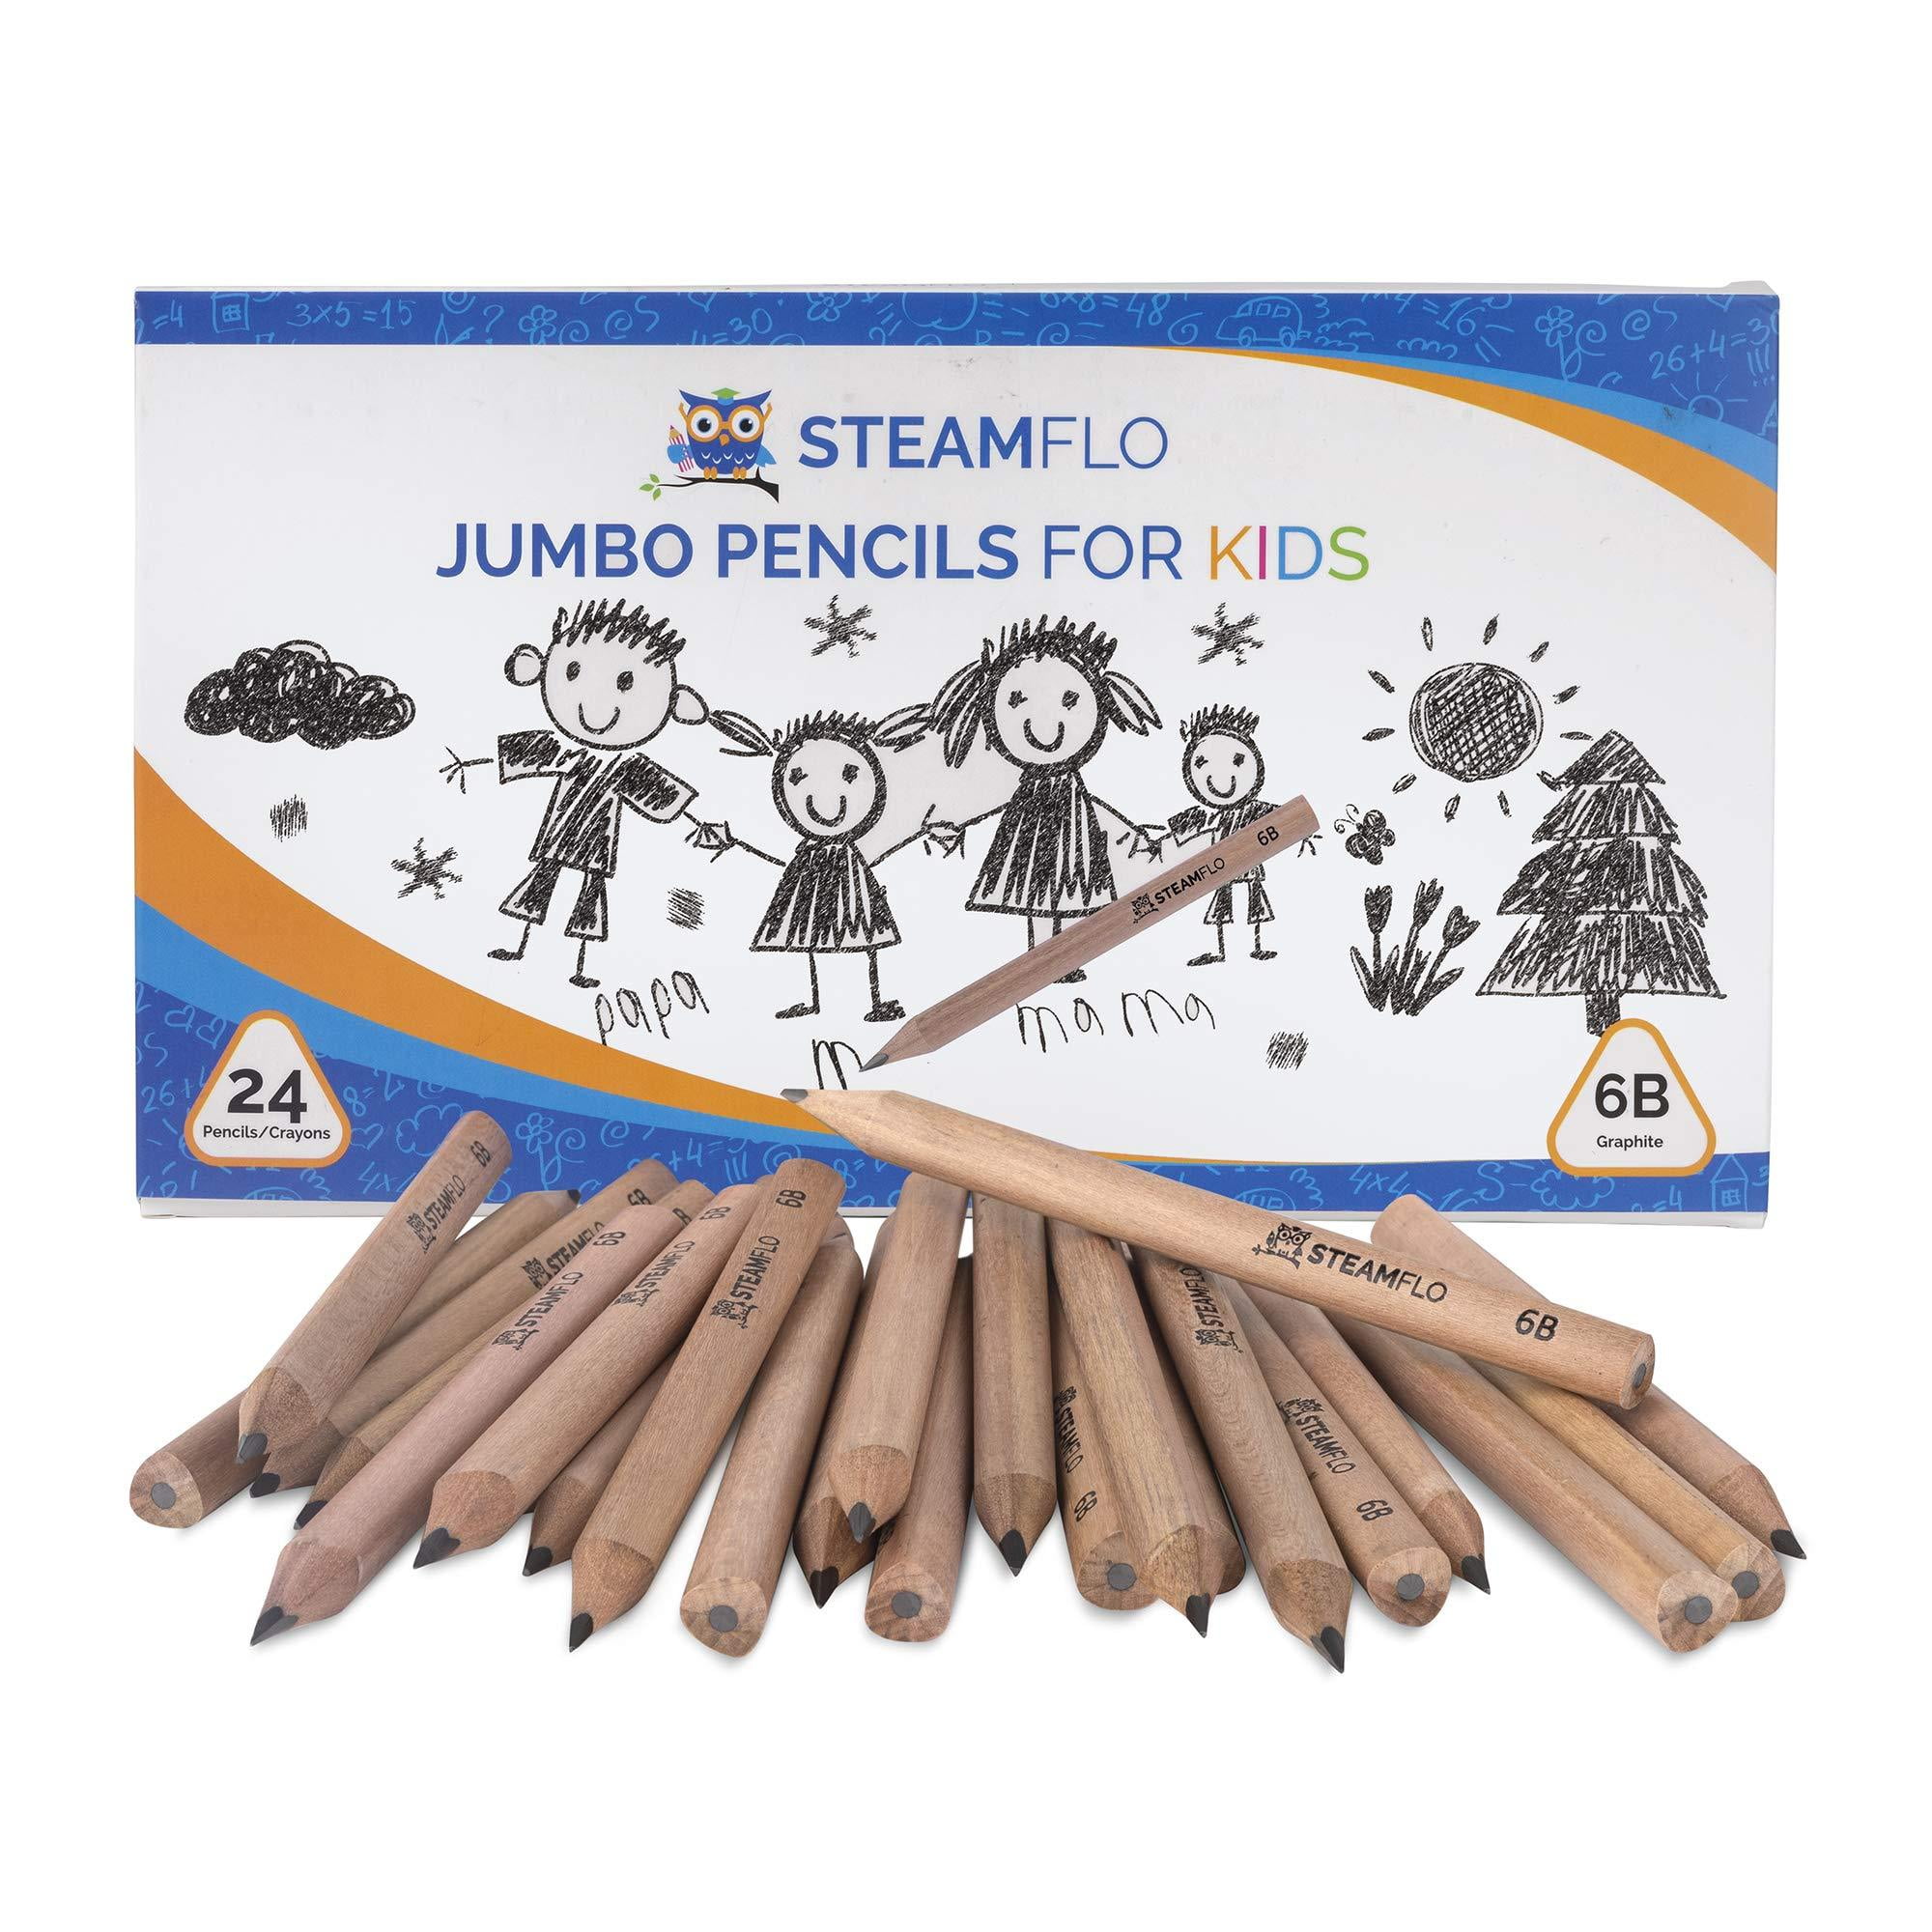  STEAMFLO Learning Pencils for Toddlers 2-4 Years – Our Kids  Pencils for Beginners Toddlers and Preschoolers with Jumbo Triangle Shape  are Specially Designed Triangle Pencils (8 Pack + Sharpener) : Office  Products